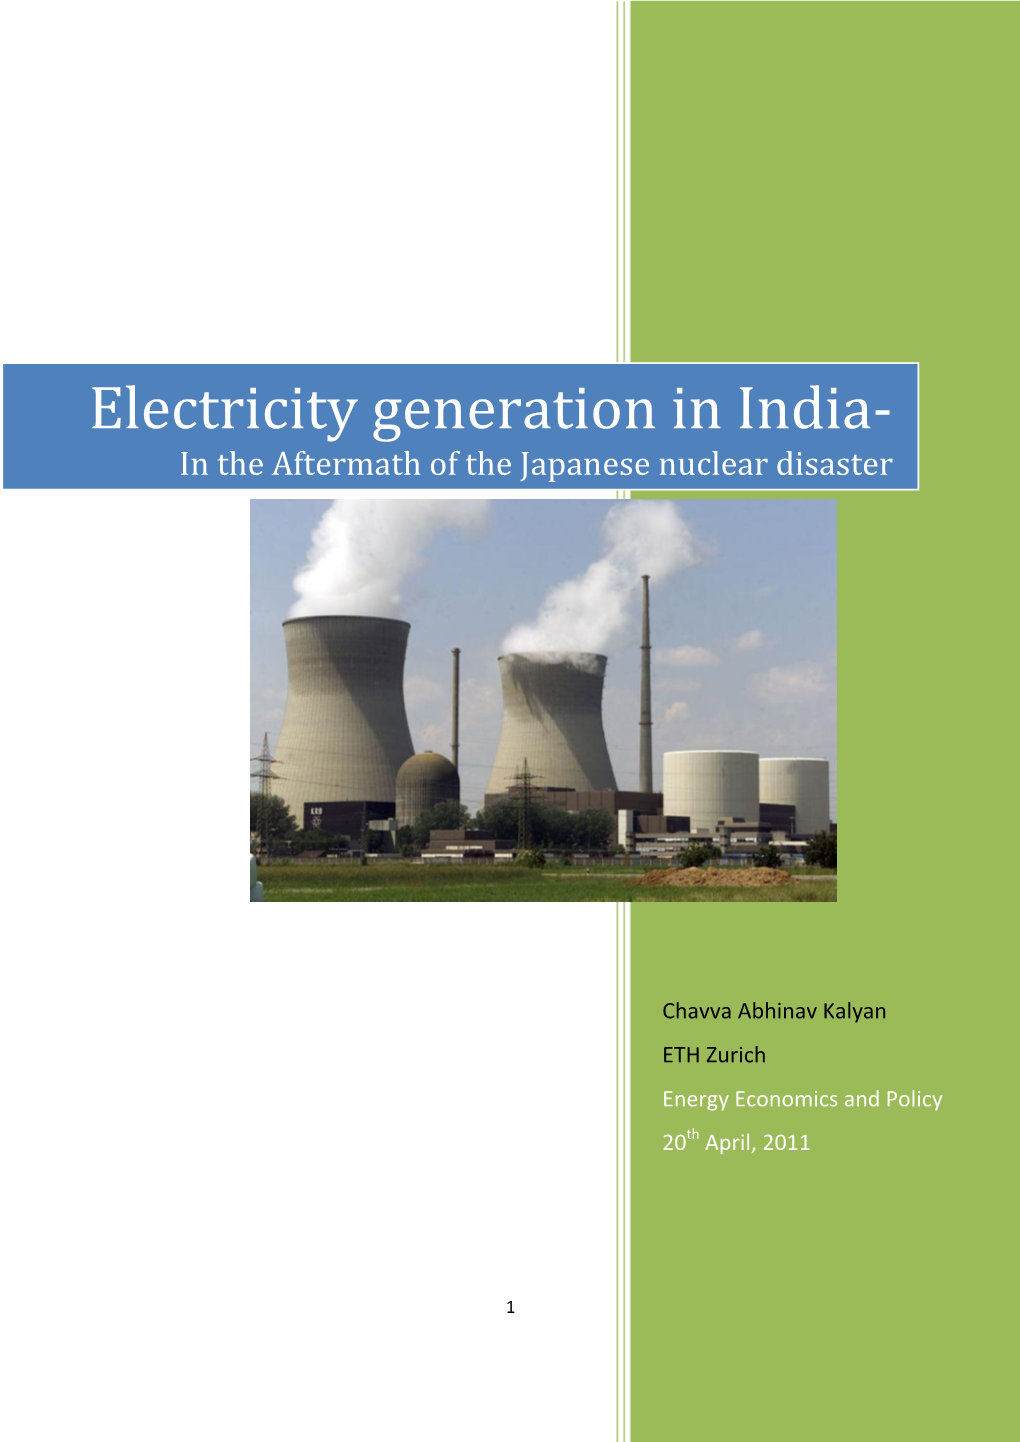 Electricity Generation in India- in the Aftermath of the Japanese Nuclear Disaster